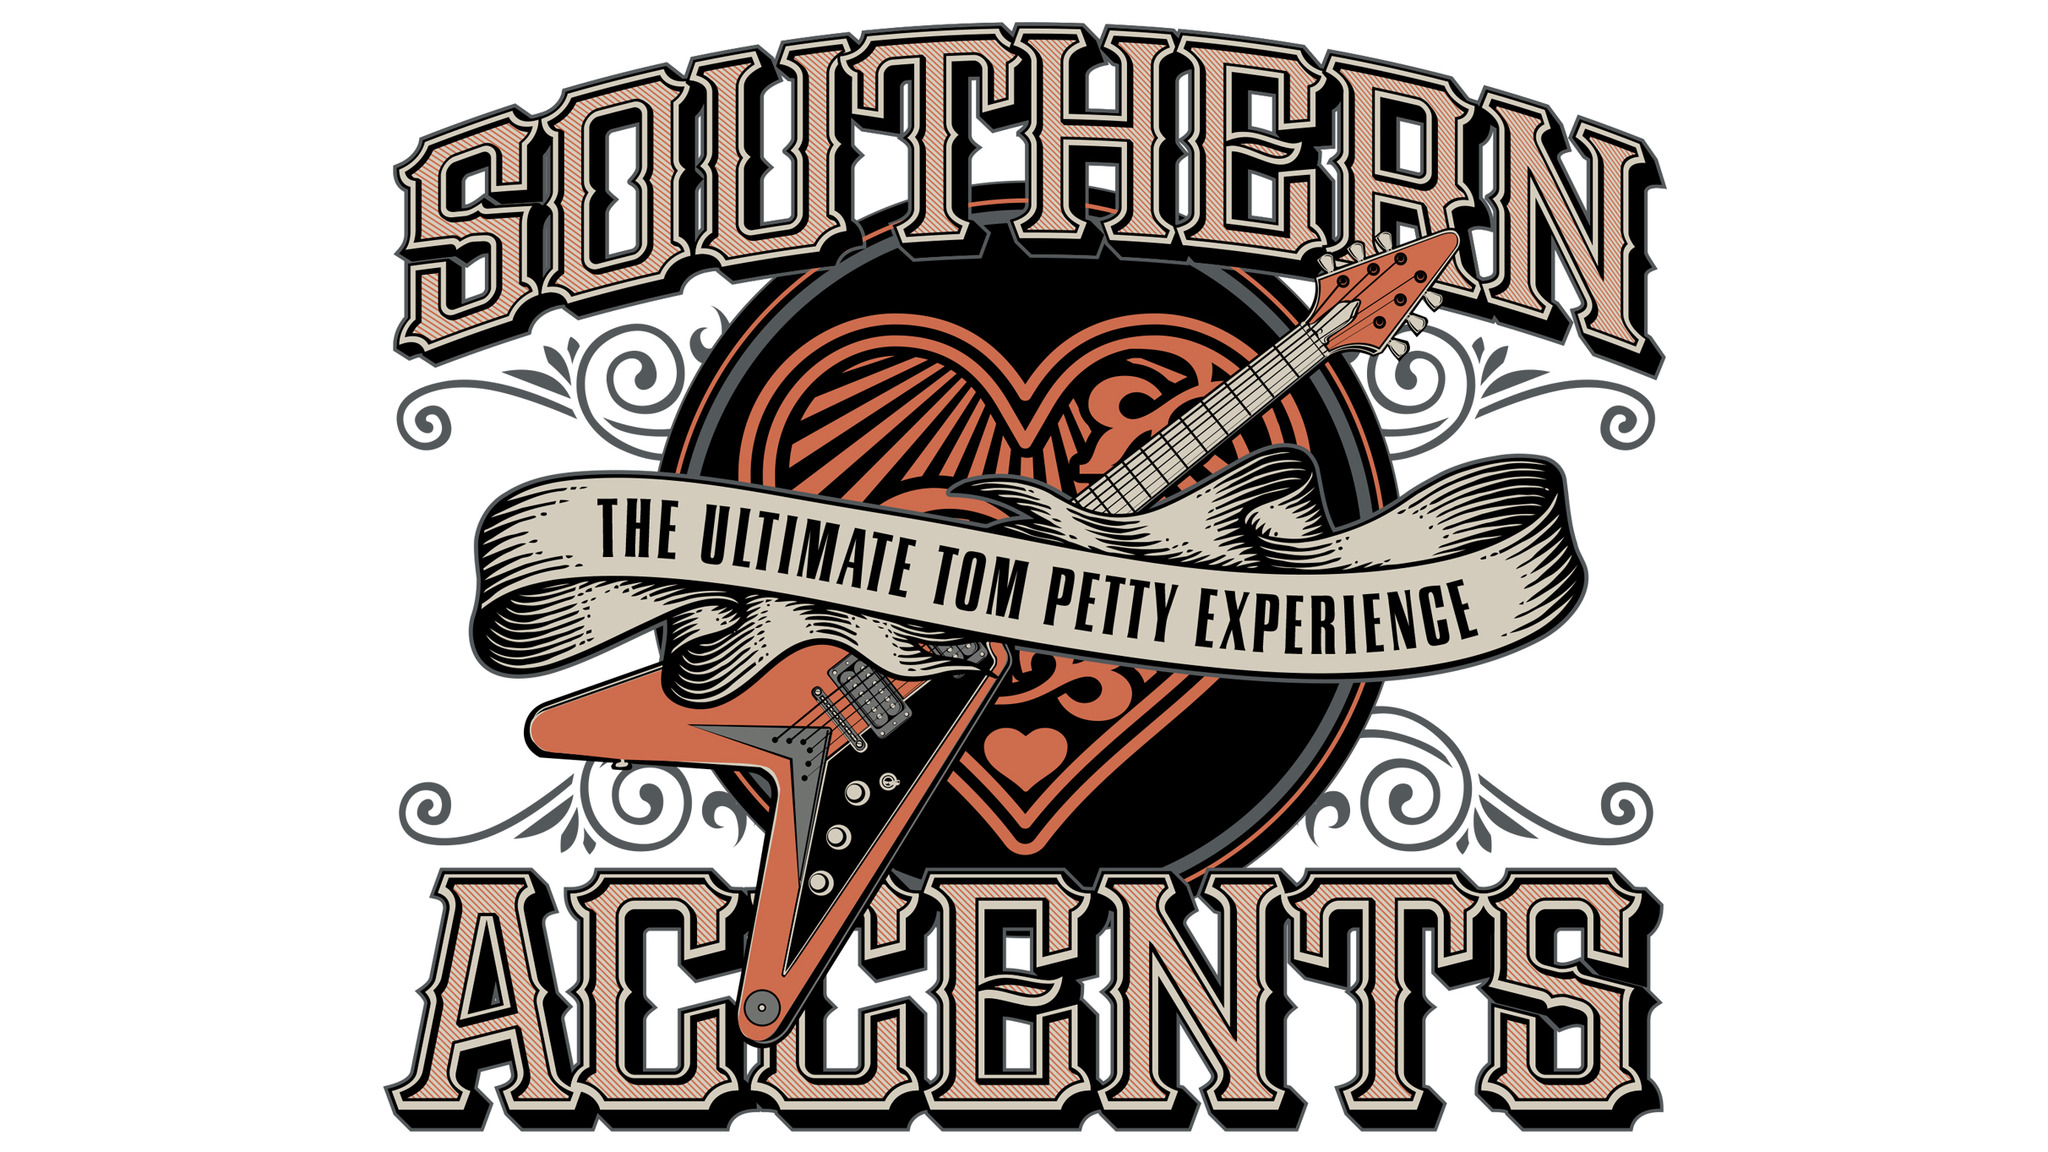 southern accents band tour